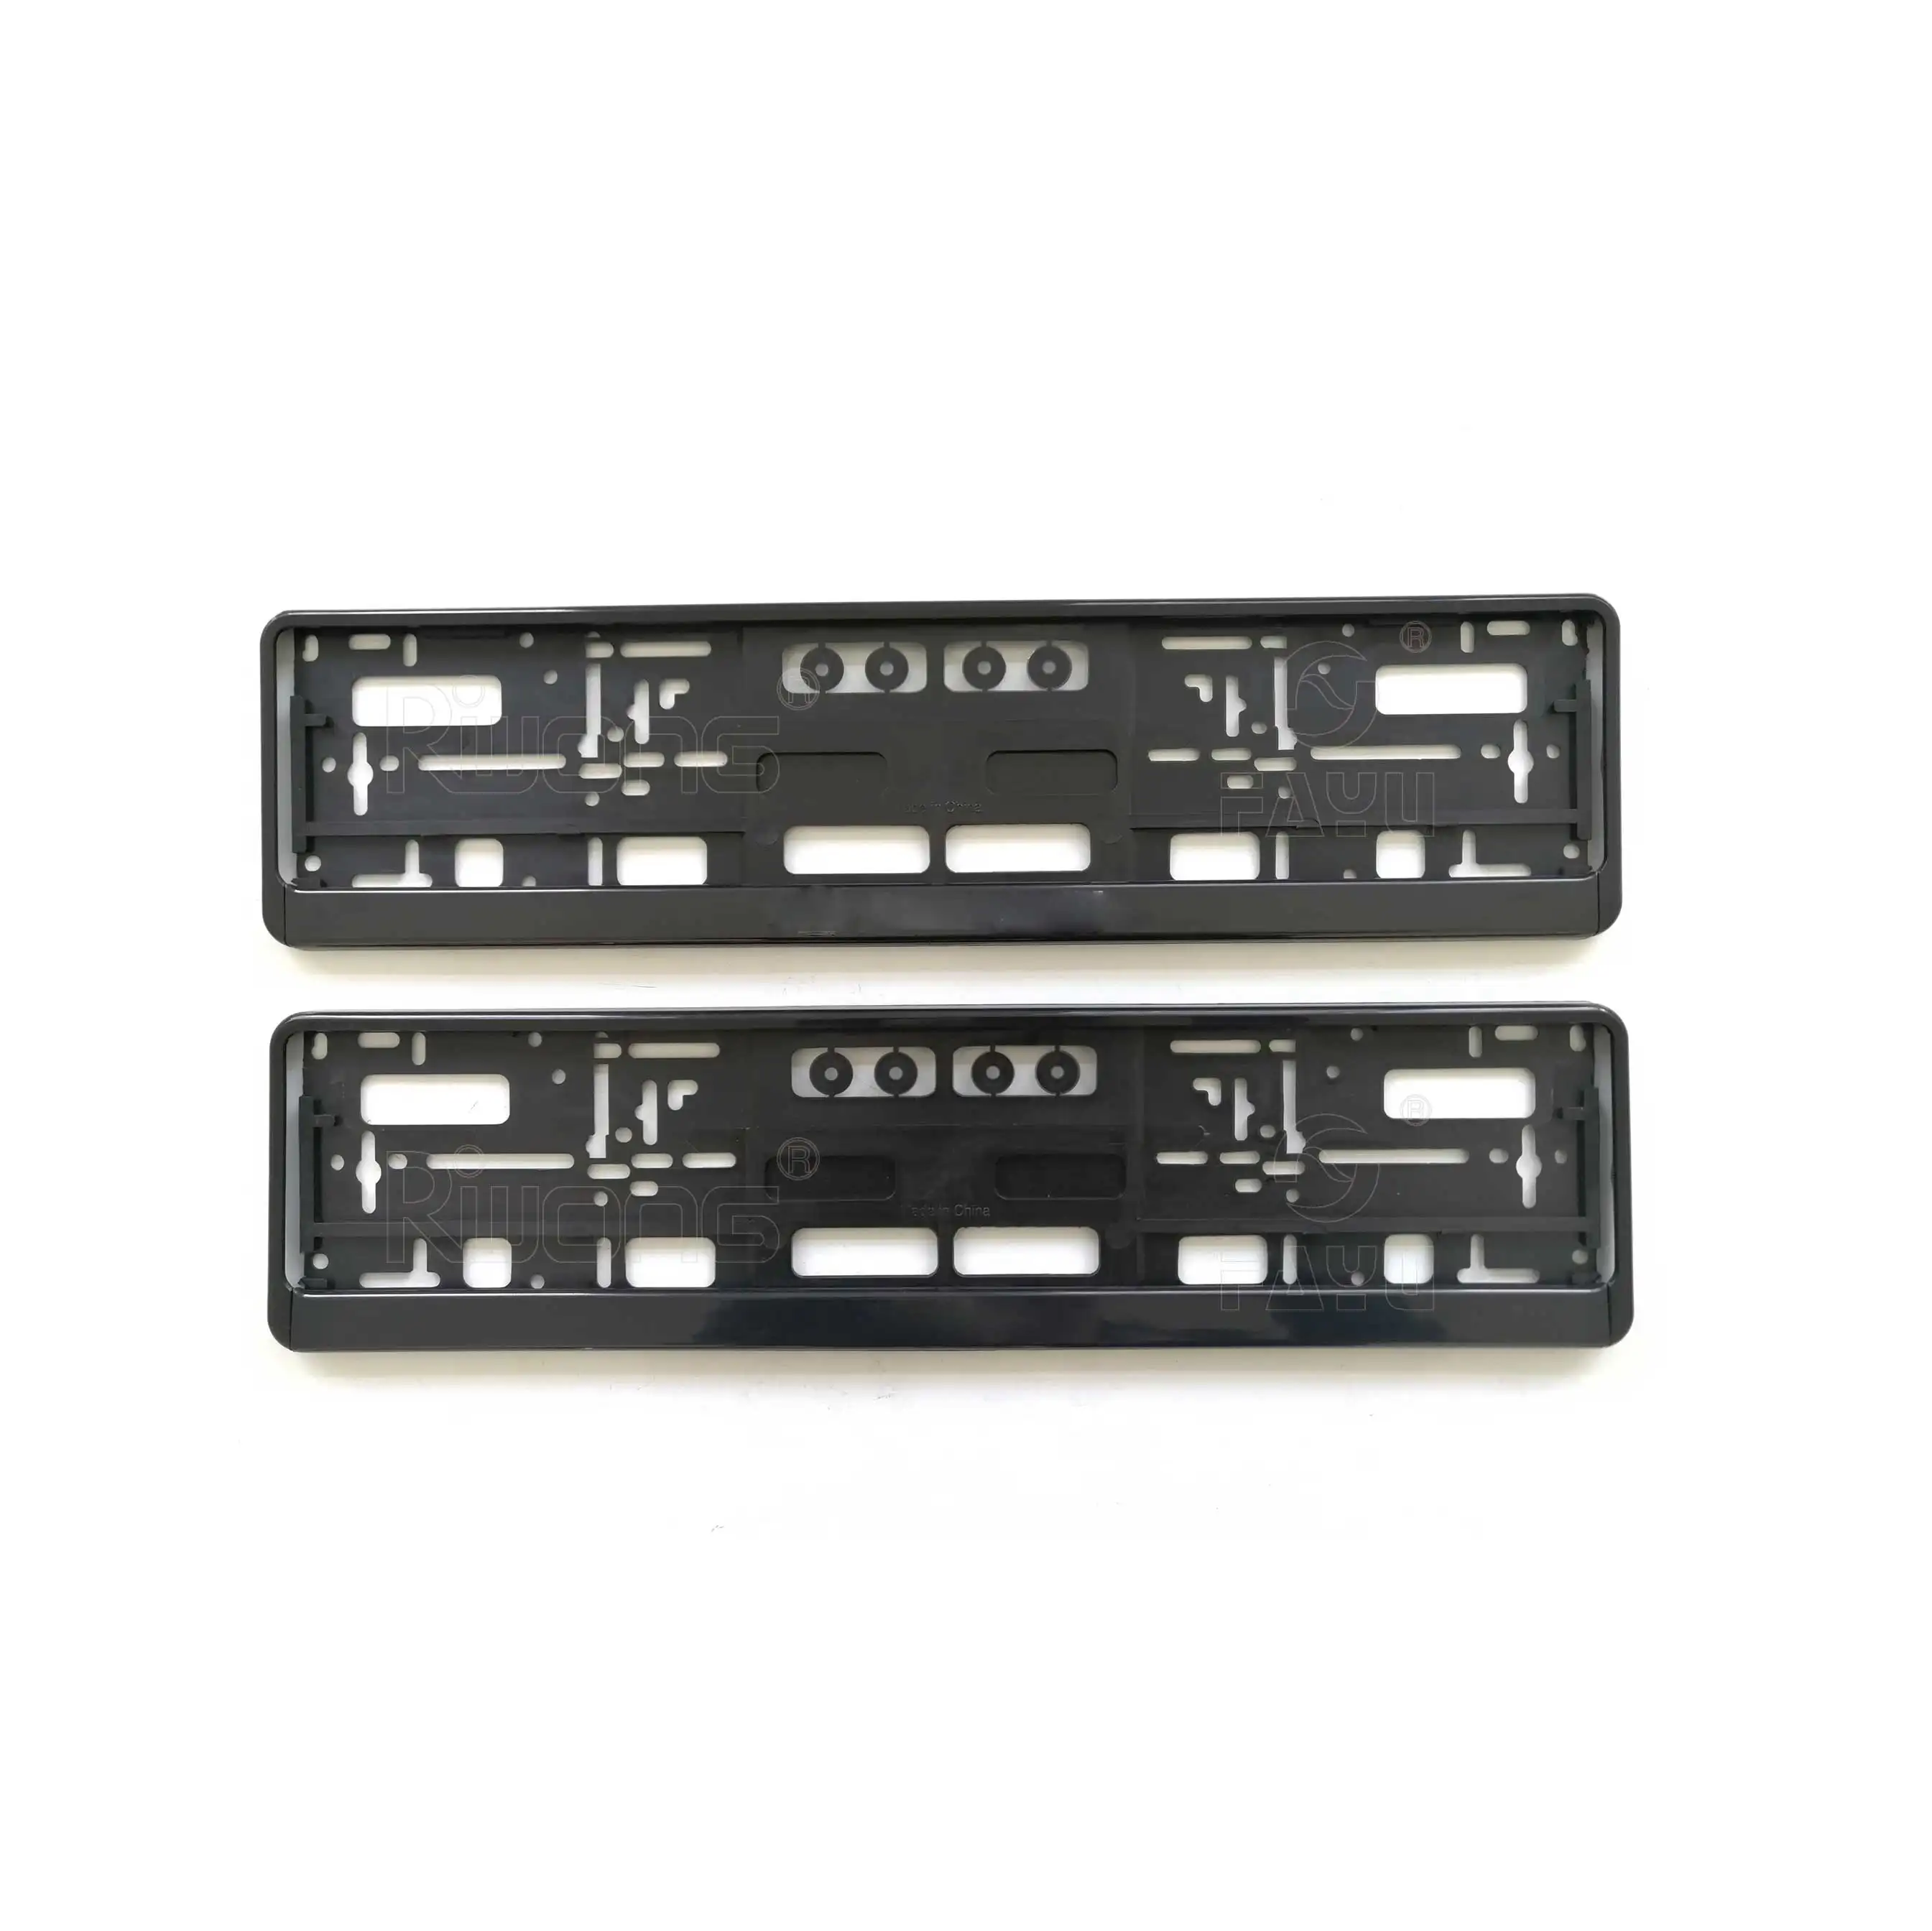 European car license plate frames with euro size for Europe